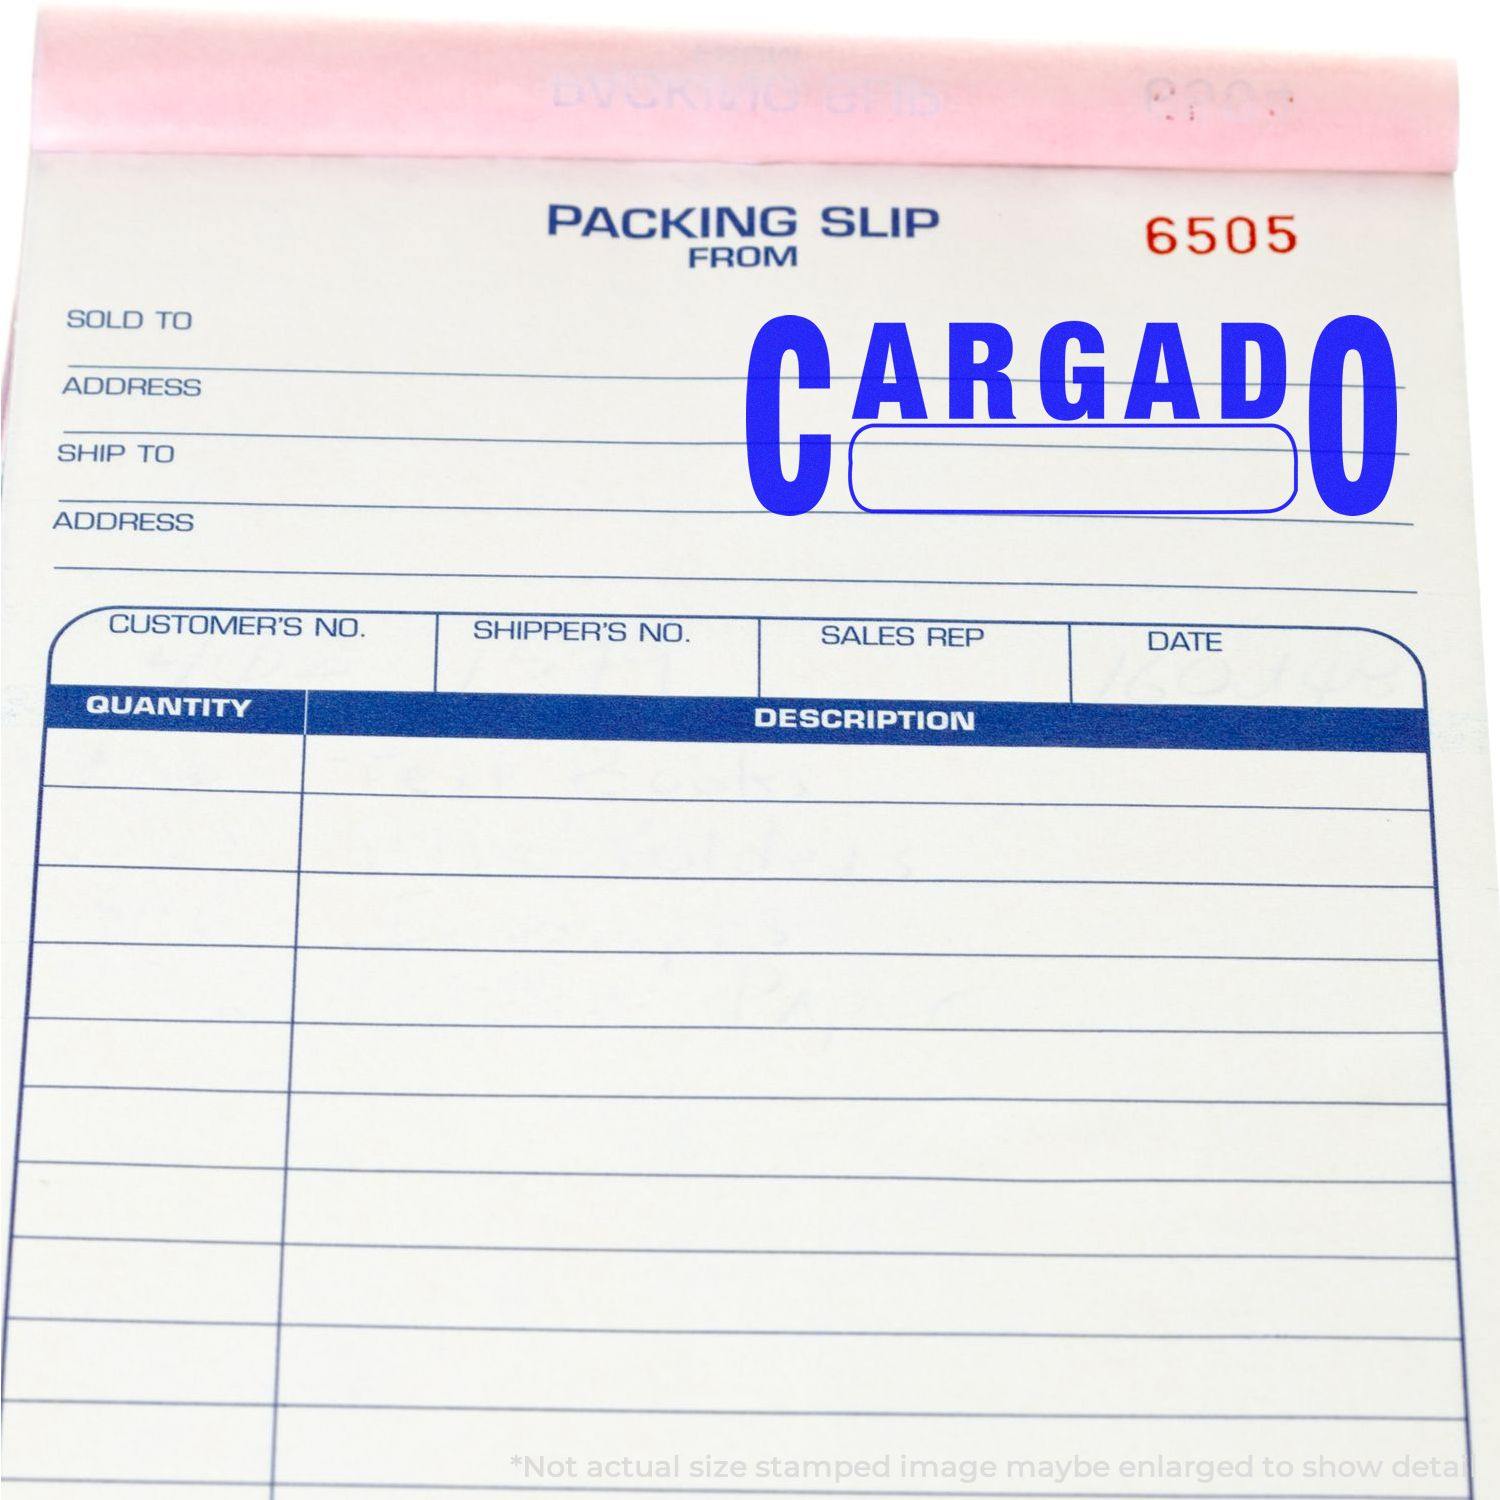 A self-inking stamp with a stamped image showing how the text "CARGADO" (with a box underneath) in a large font is displayed by it after stamping.